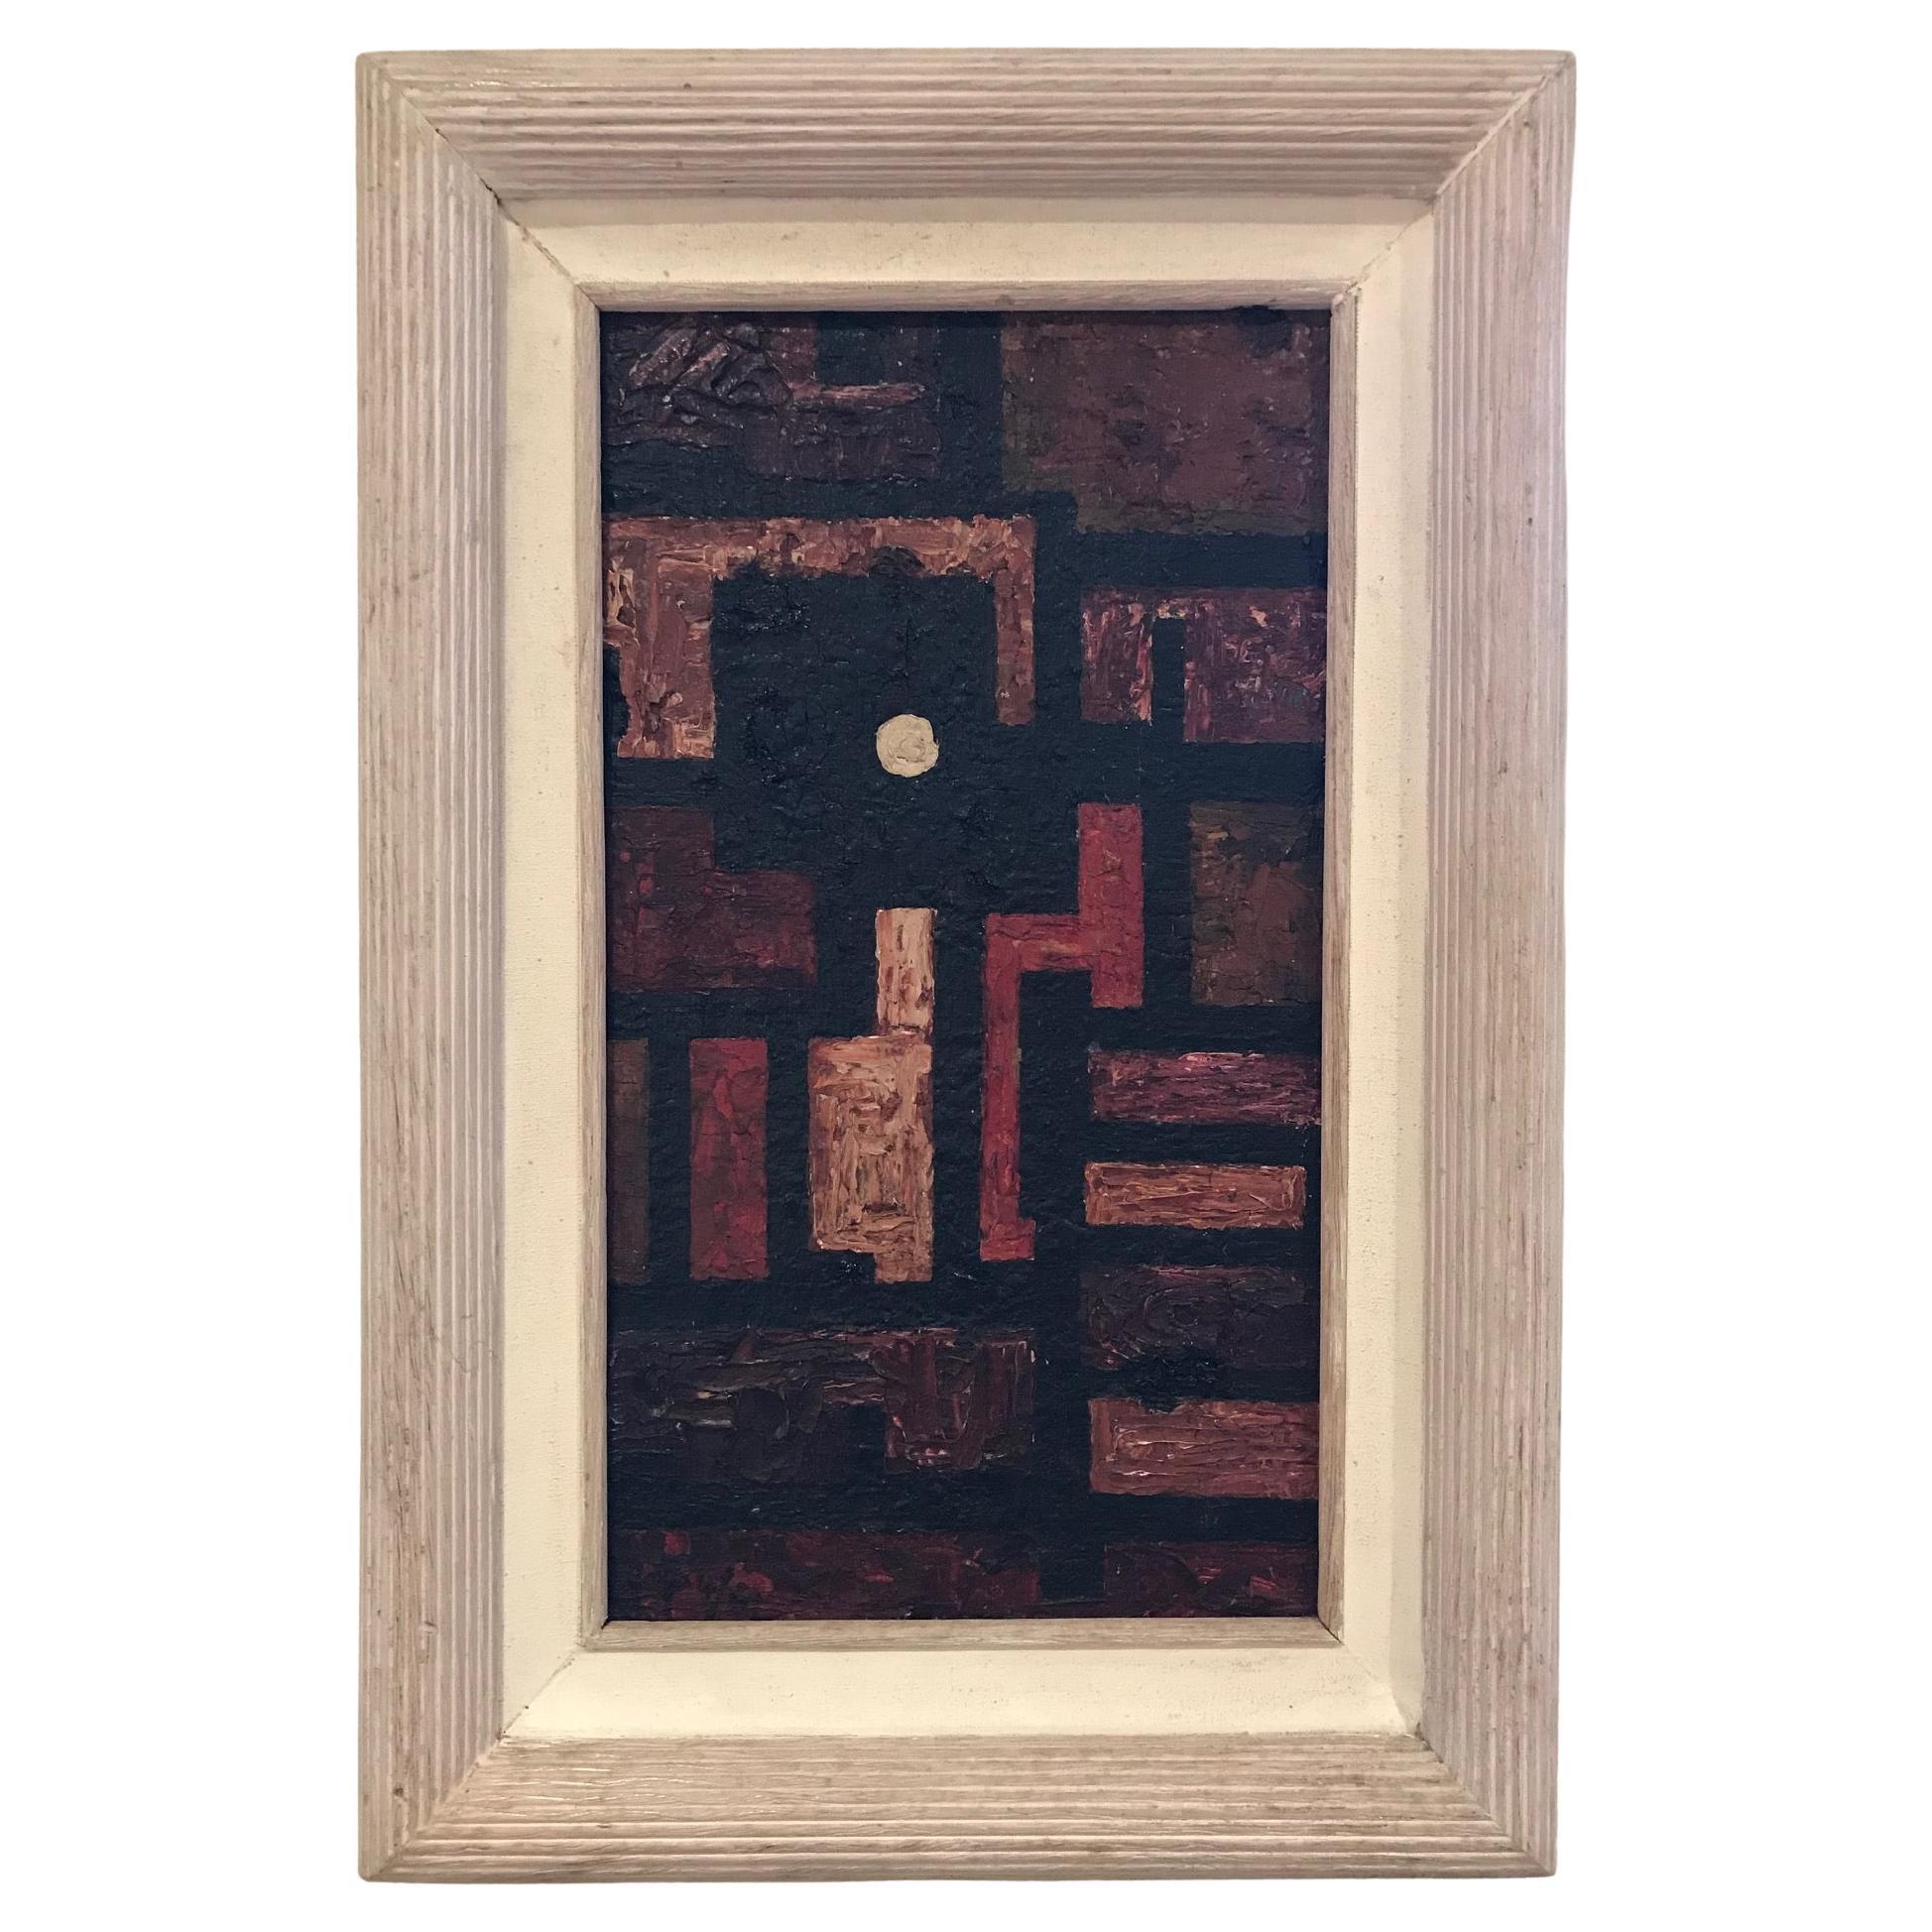 1960s British Geometric Abstract Oil on Board